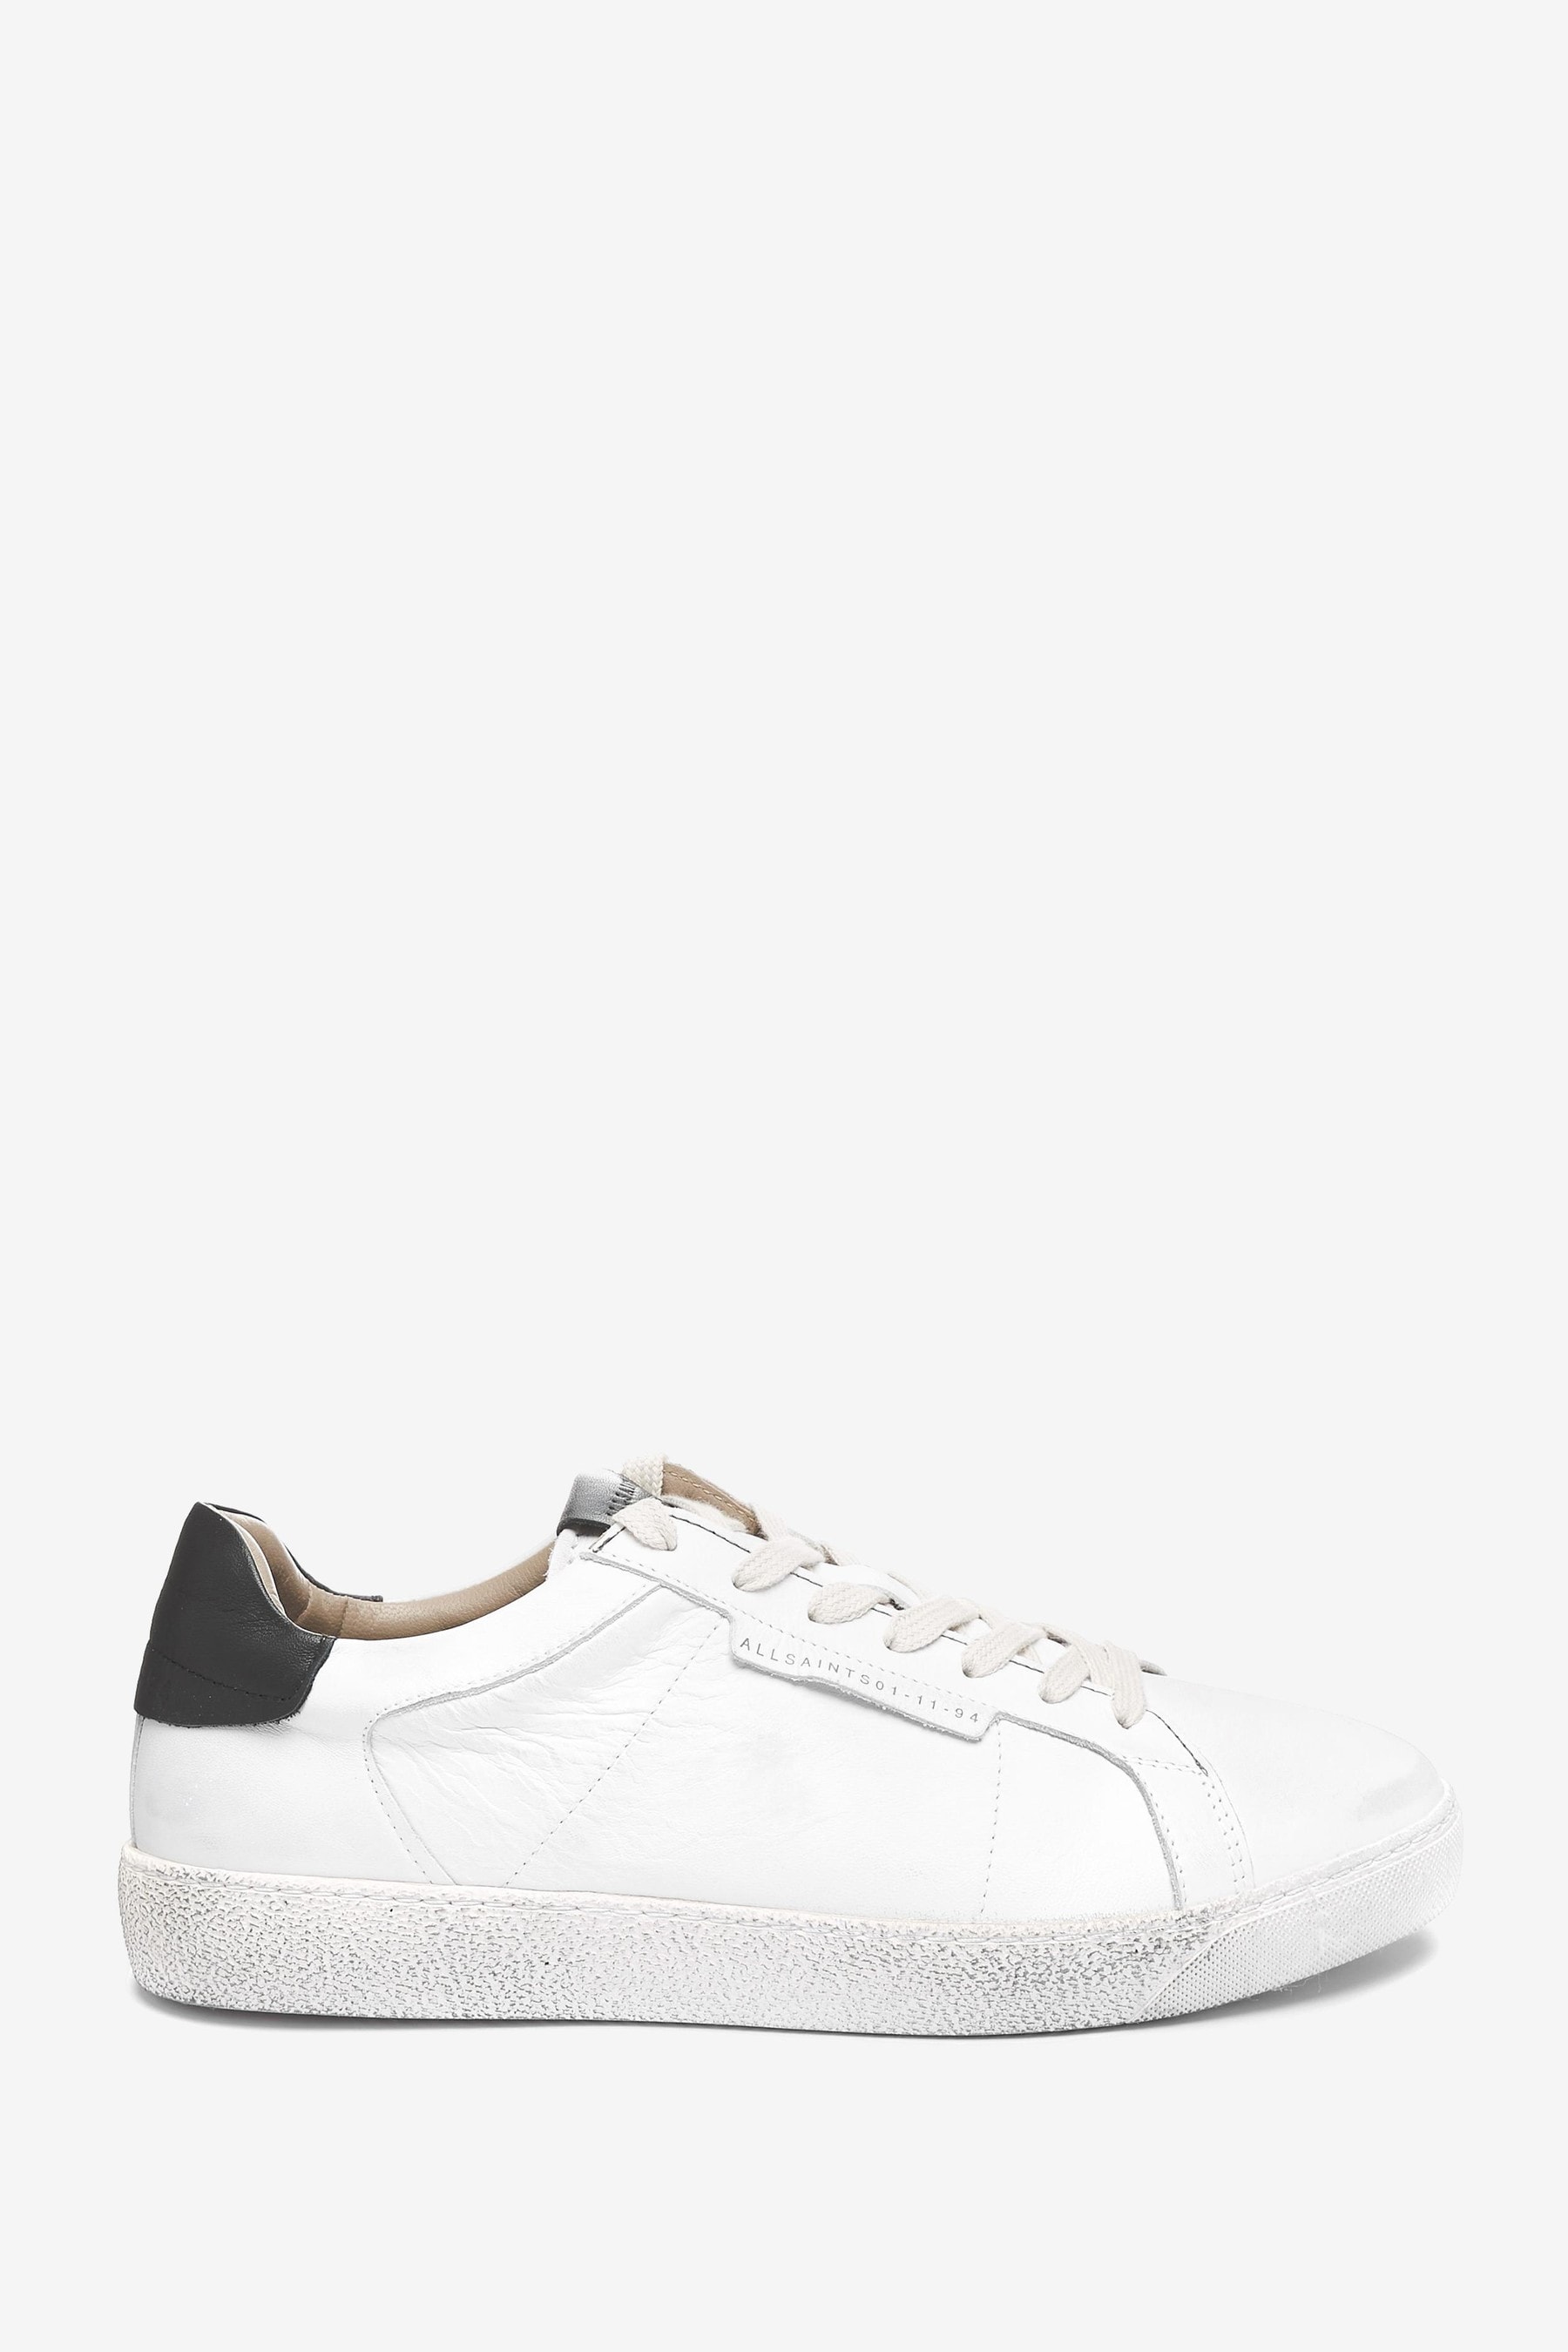 Buy AllSaints White Sheer Low Top Lace-Up Cervo Shoes from the Next UK ...